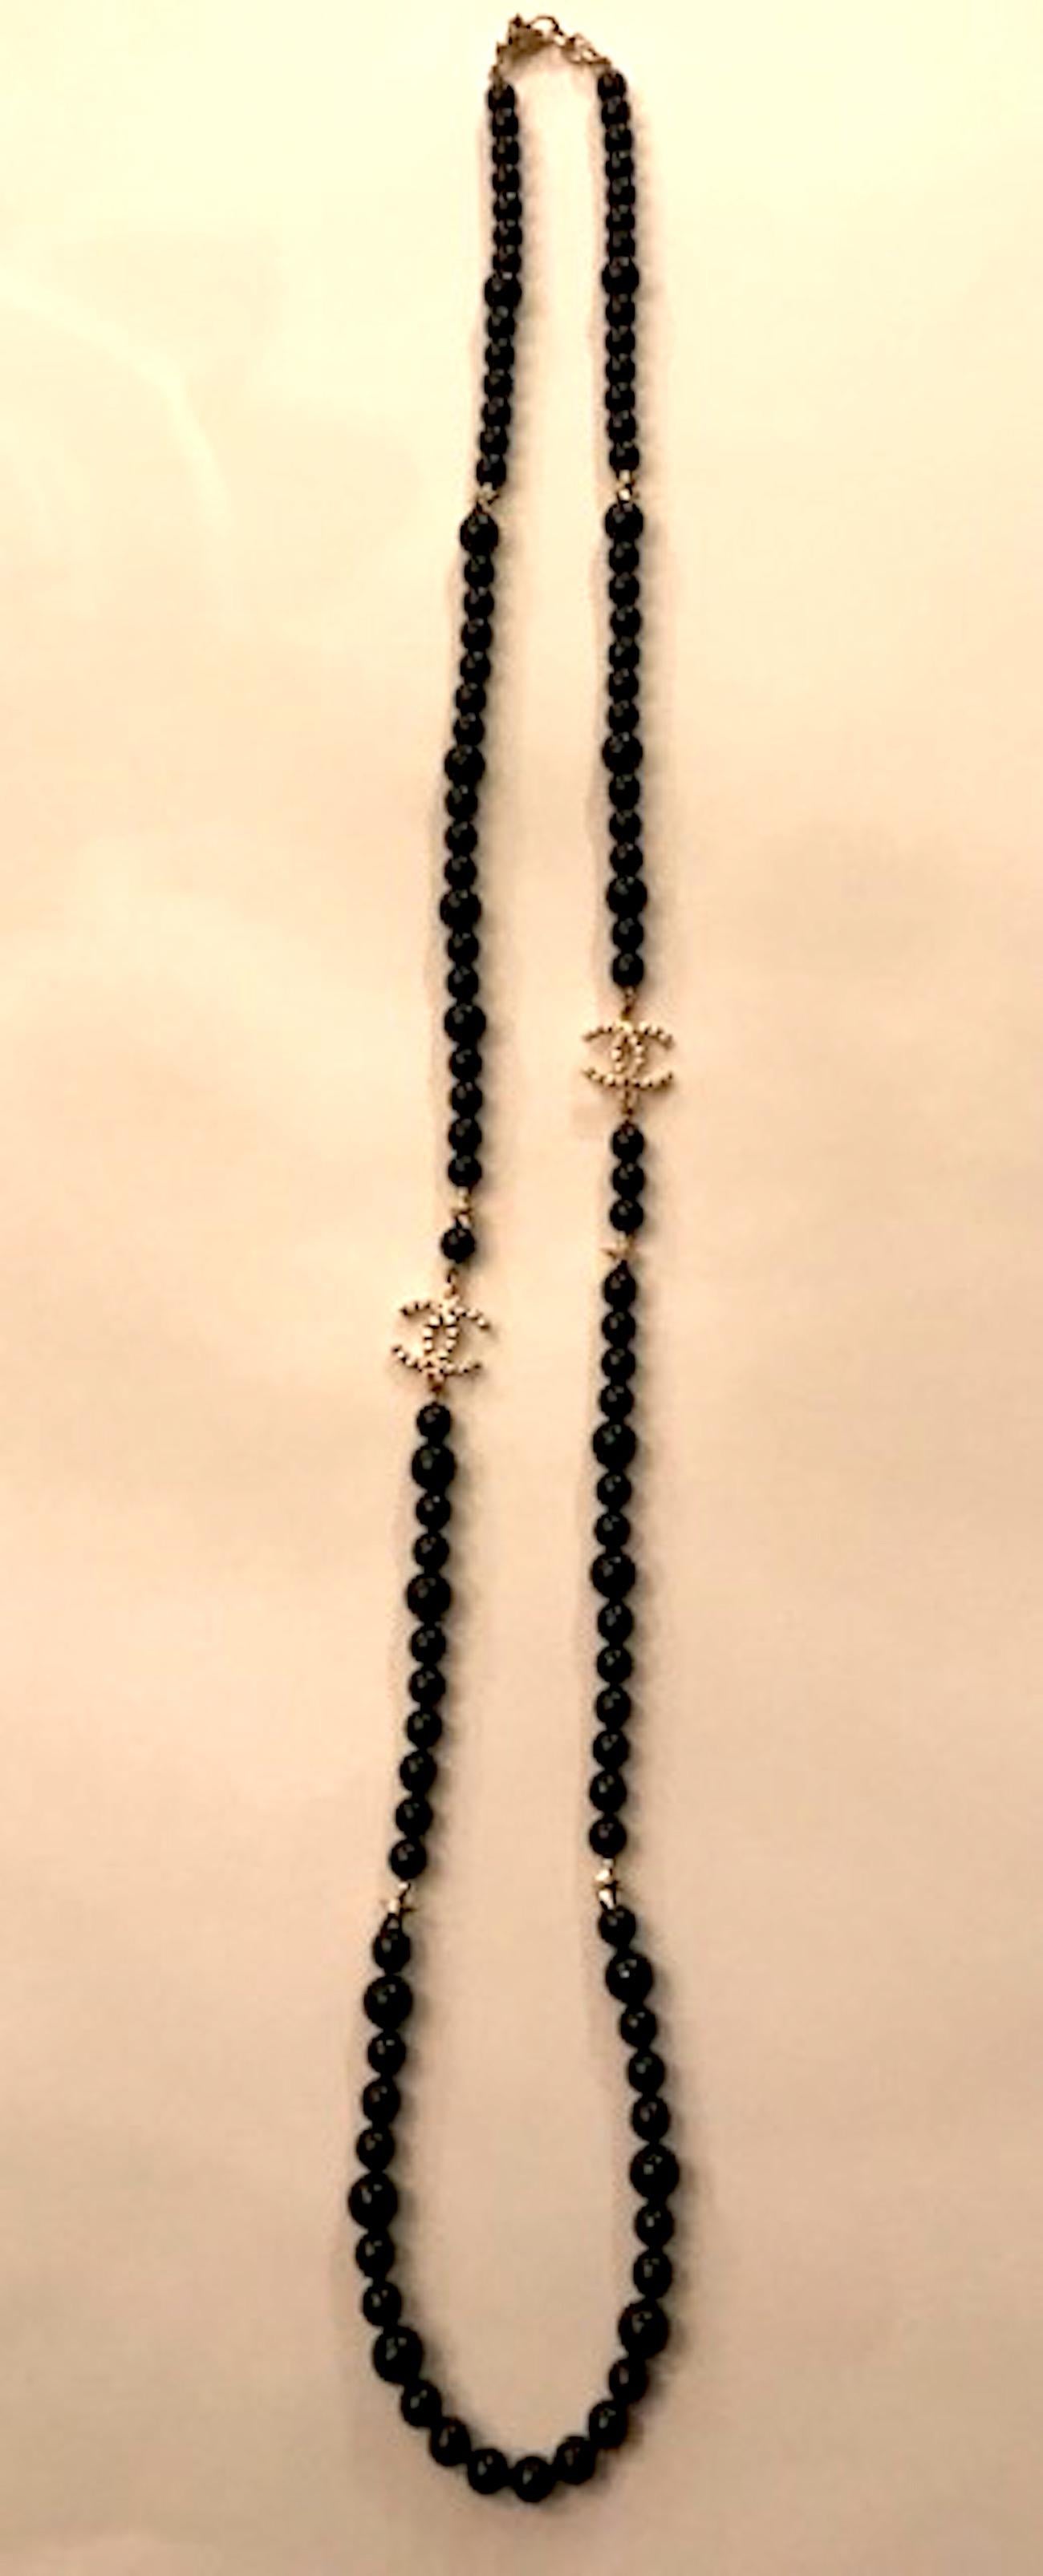 Chanel Long Black Glass Bead & Star Necklace, 2017 Cruise Collection 7